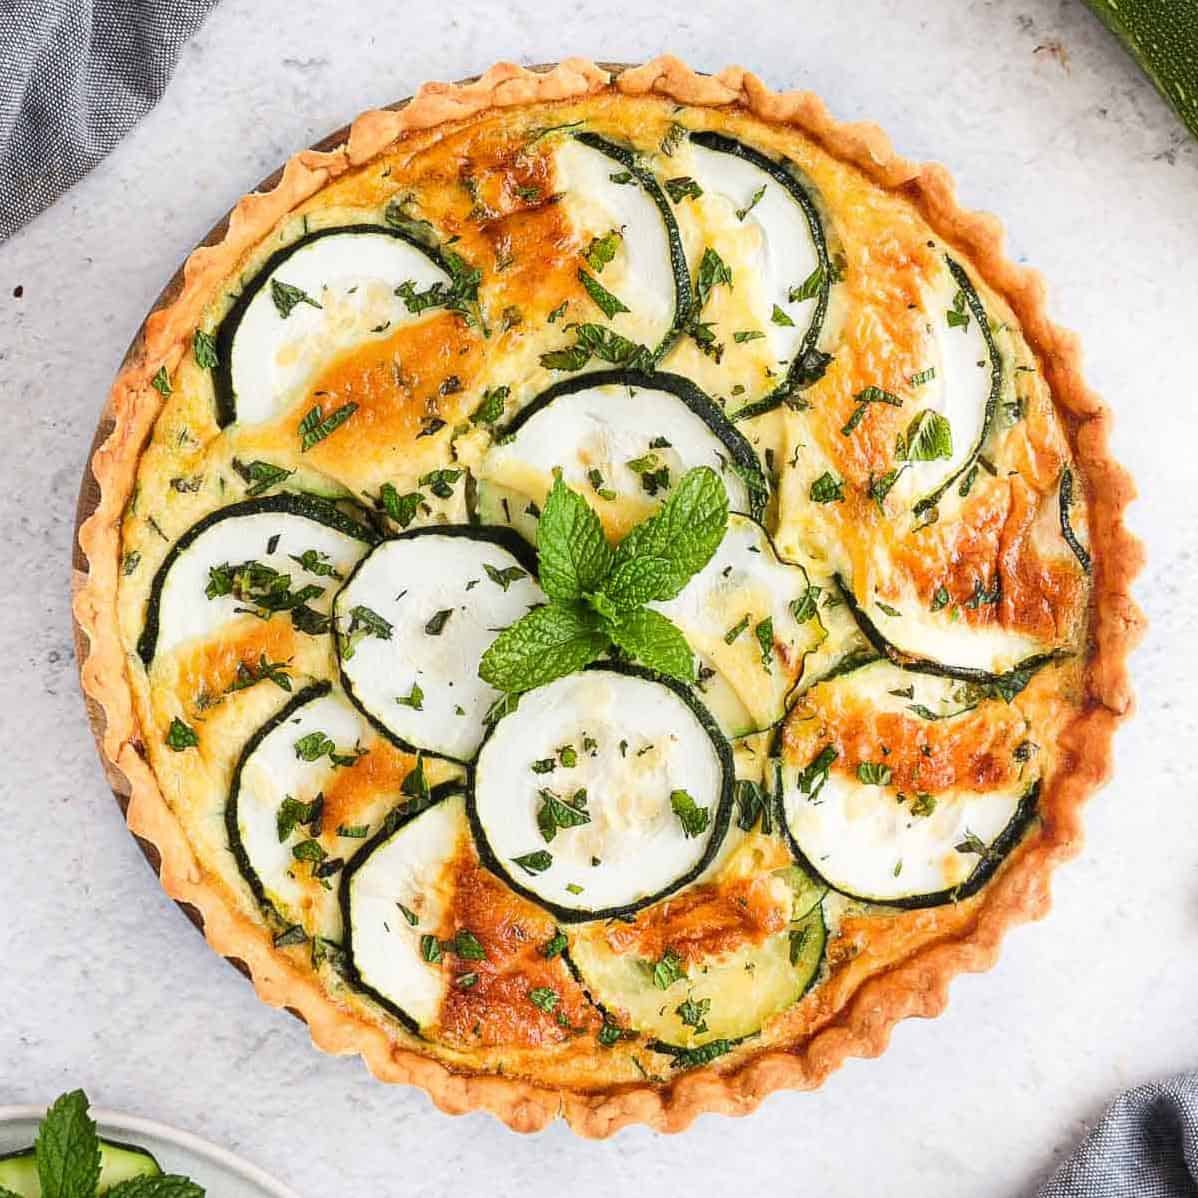  Beautifully arranged zucchini slices on a bed of feta cheese spread